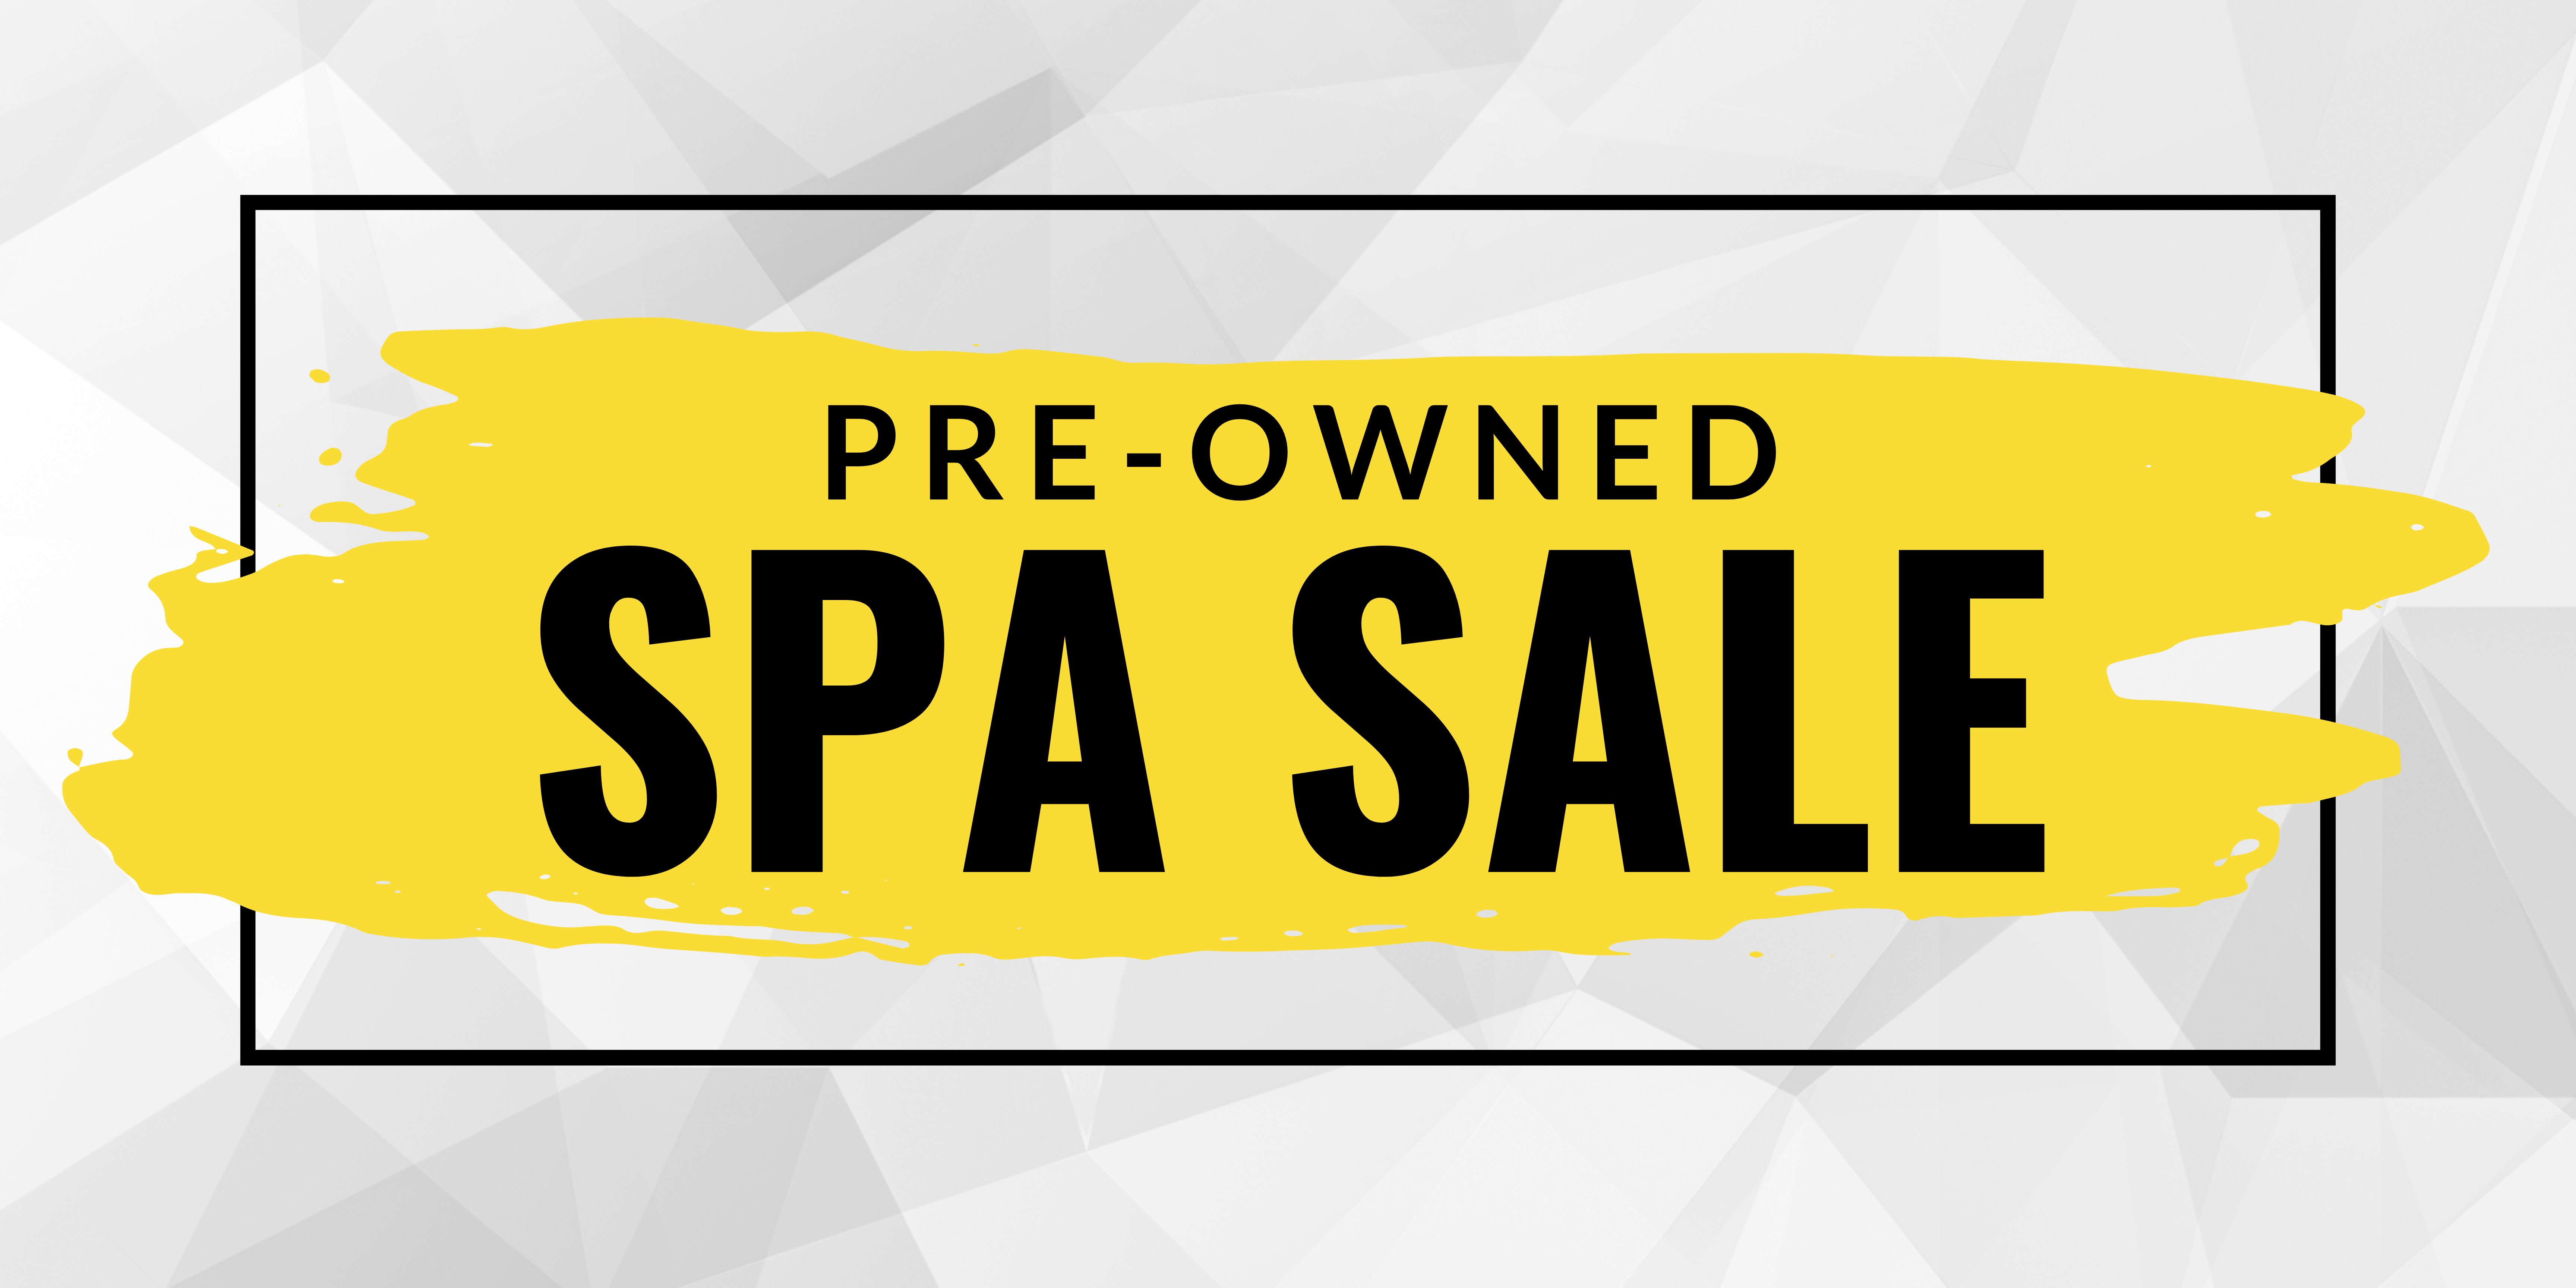 15 Hour Used Hot Tub Sale.  Yellow splash with black lettering that says pre-owned spa sale